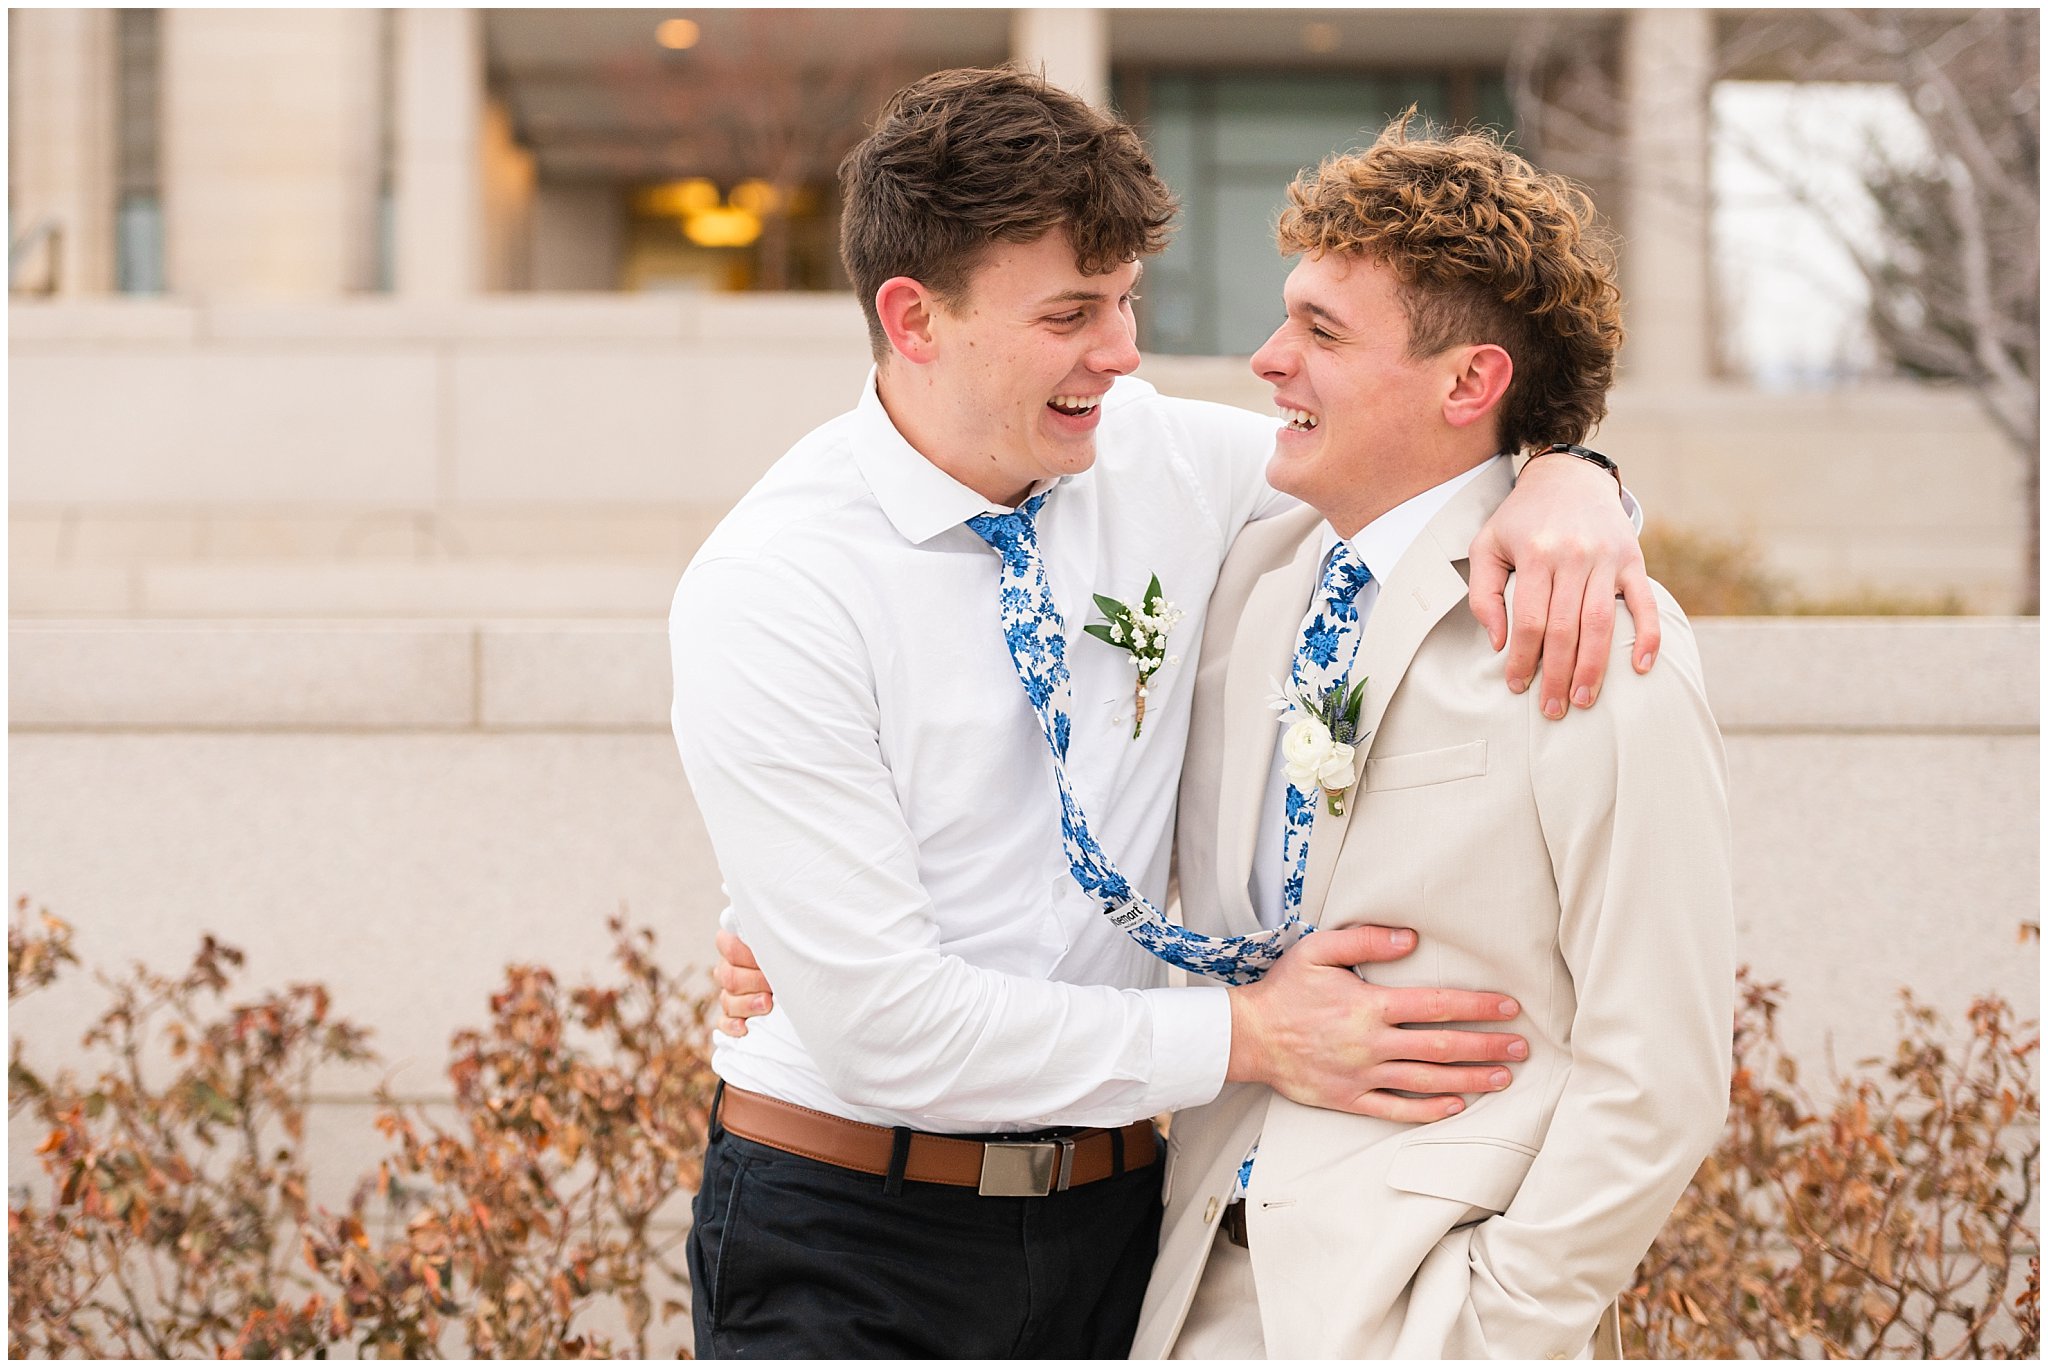 Groom surrounded by groomsmen candid moment | Oquirrh Mountain Temple and Draper Day Barn Winter Wedding | Jessie and Dallin Photography